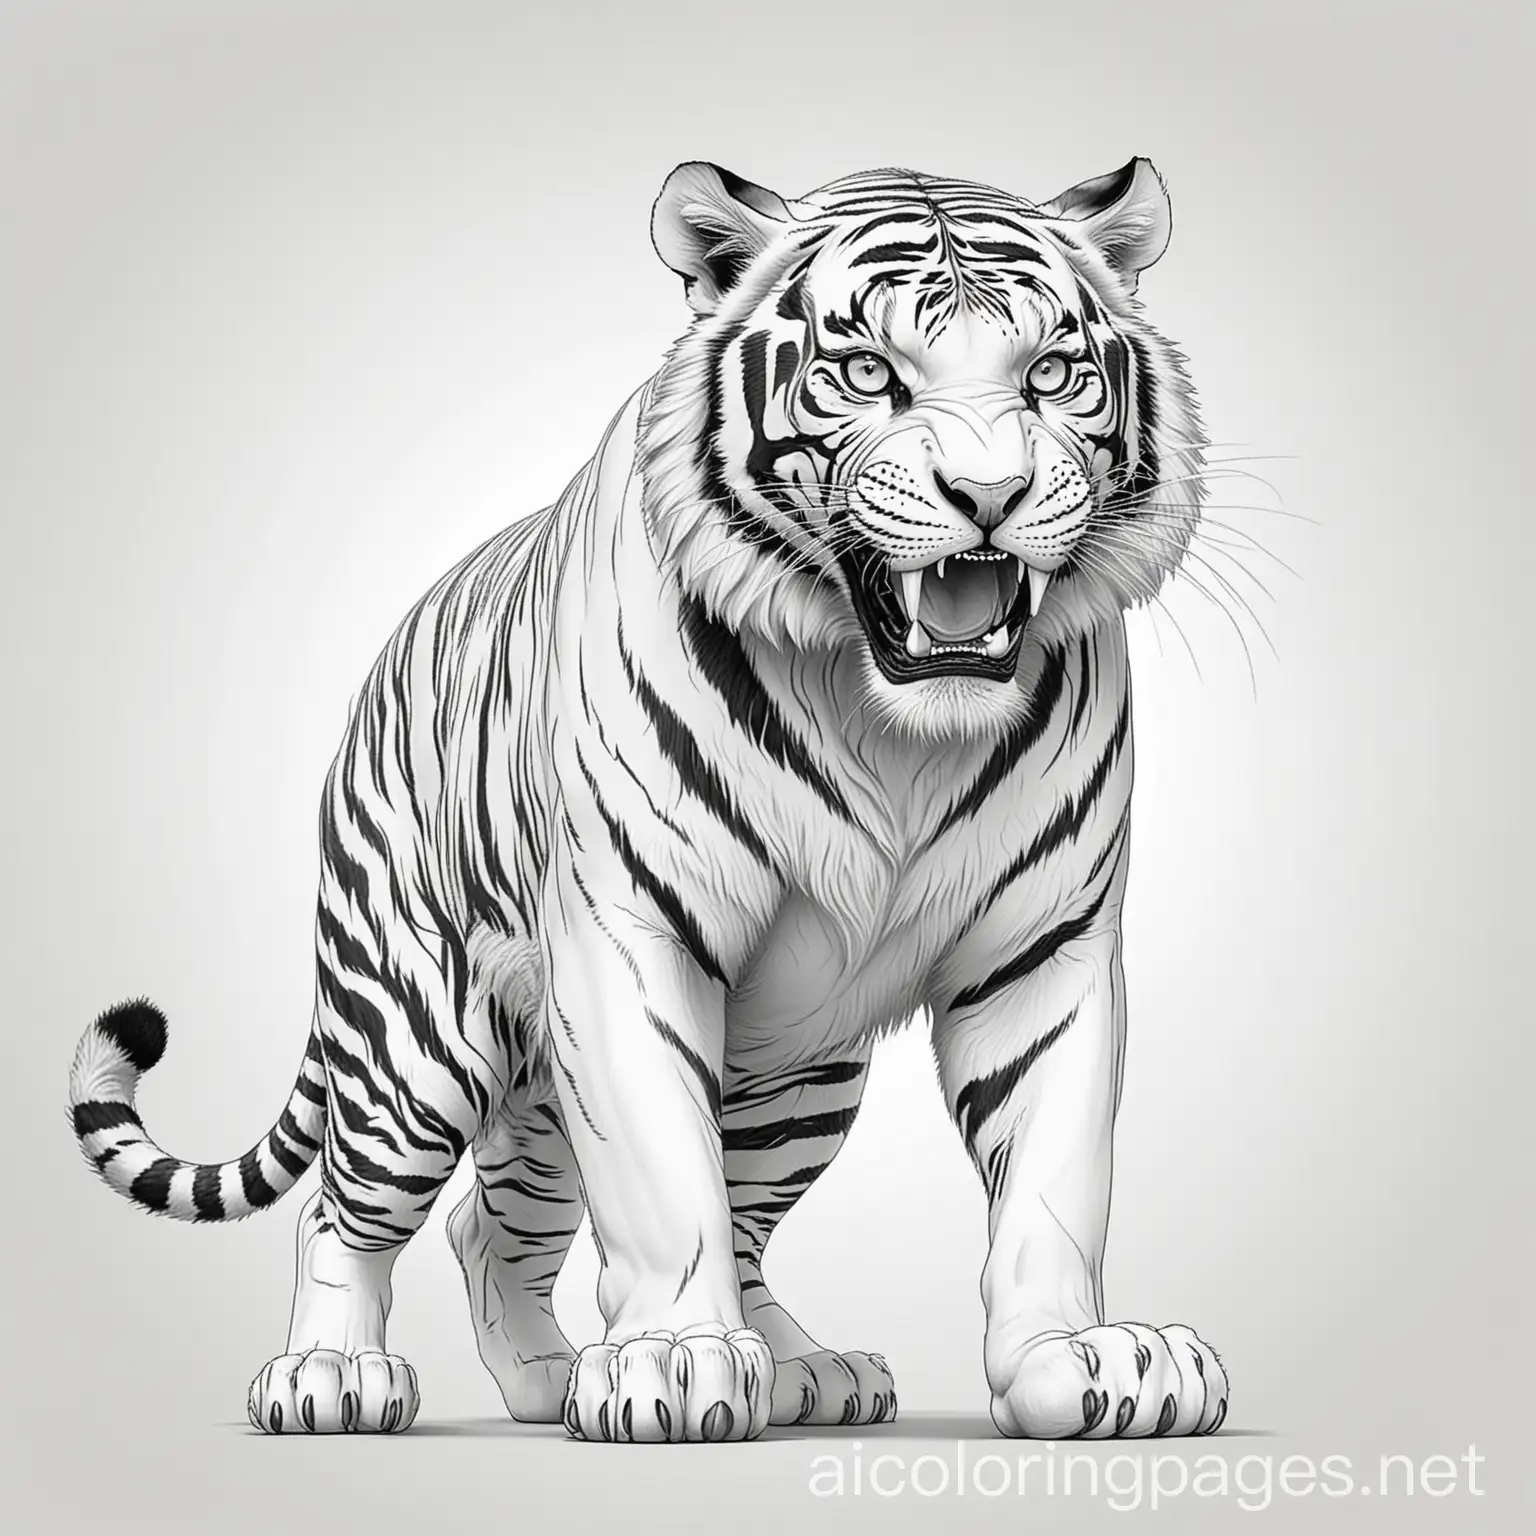 full body of a big big scary tiger who is ready to attack an animal with open mouth. in cartoon sytle Coloring Page, black and white, line art, white background, Simplicity, Ample White Space. The background of the coloring page is plain white to make it easy for young children to color within the lines. The outlines of all the subjects are easy to distinguish, making it simple for kids to color without too much difficulty, Coloring Page, black and white, line art, white background, Simplicity, Ample White Space. The background of the coloring page is plain white to make it easy for young children to color within the lines. The outlines of all the subjects are easy to distinguish, making it simple for kids to color without too much difficulty, Coloring Page, black and white, line art, white background, Simplicity, Ample White Space. The background of the coloring page is plain white to make it easy for young children to color within the lines. The outlines of all the subjects are easy to distinguish, making it simple for kids to color without too much difficulty